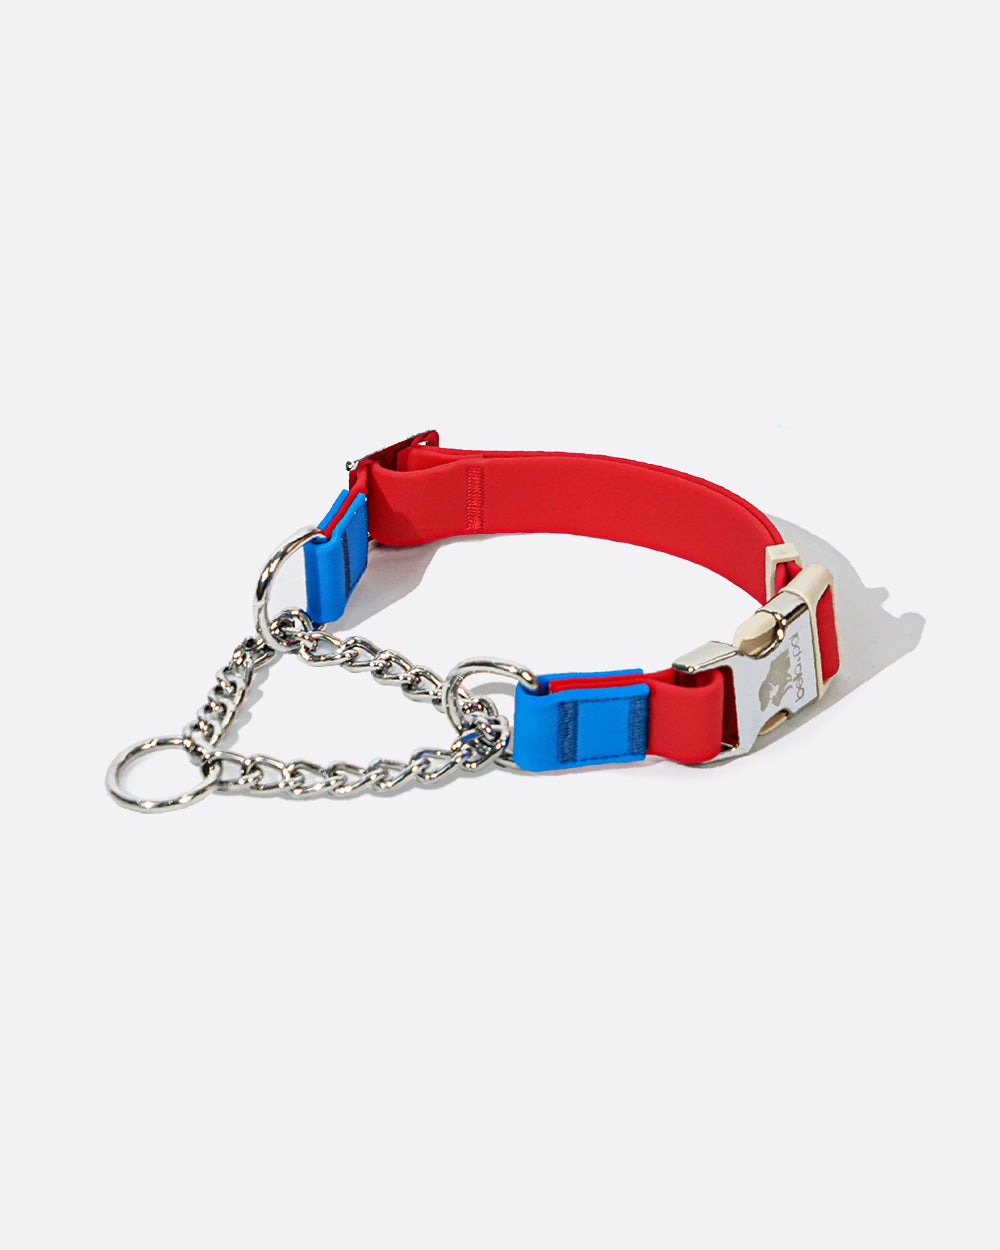 The no-pull Martingale collar comes in a red and blue color mix inspired by Spiderman, suitable for medium and large dogs with pulling behaviors during walks. Available in sizes M and L.